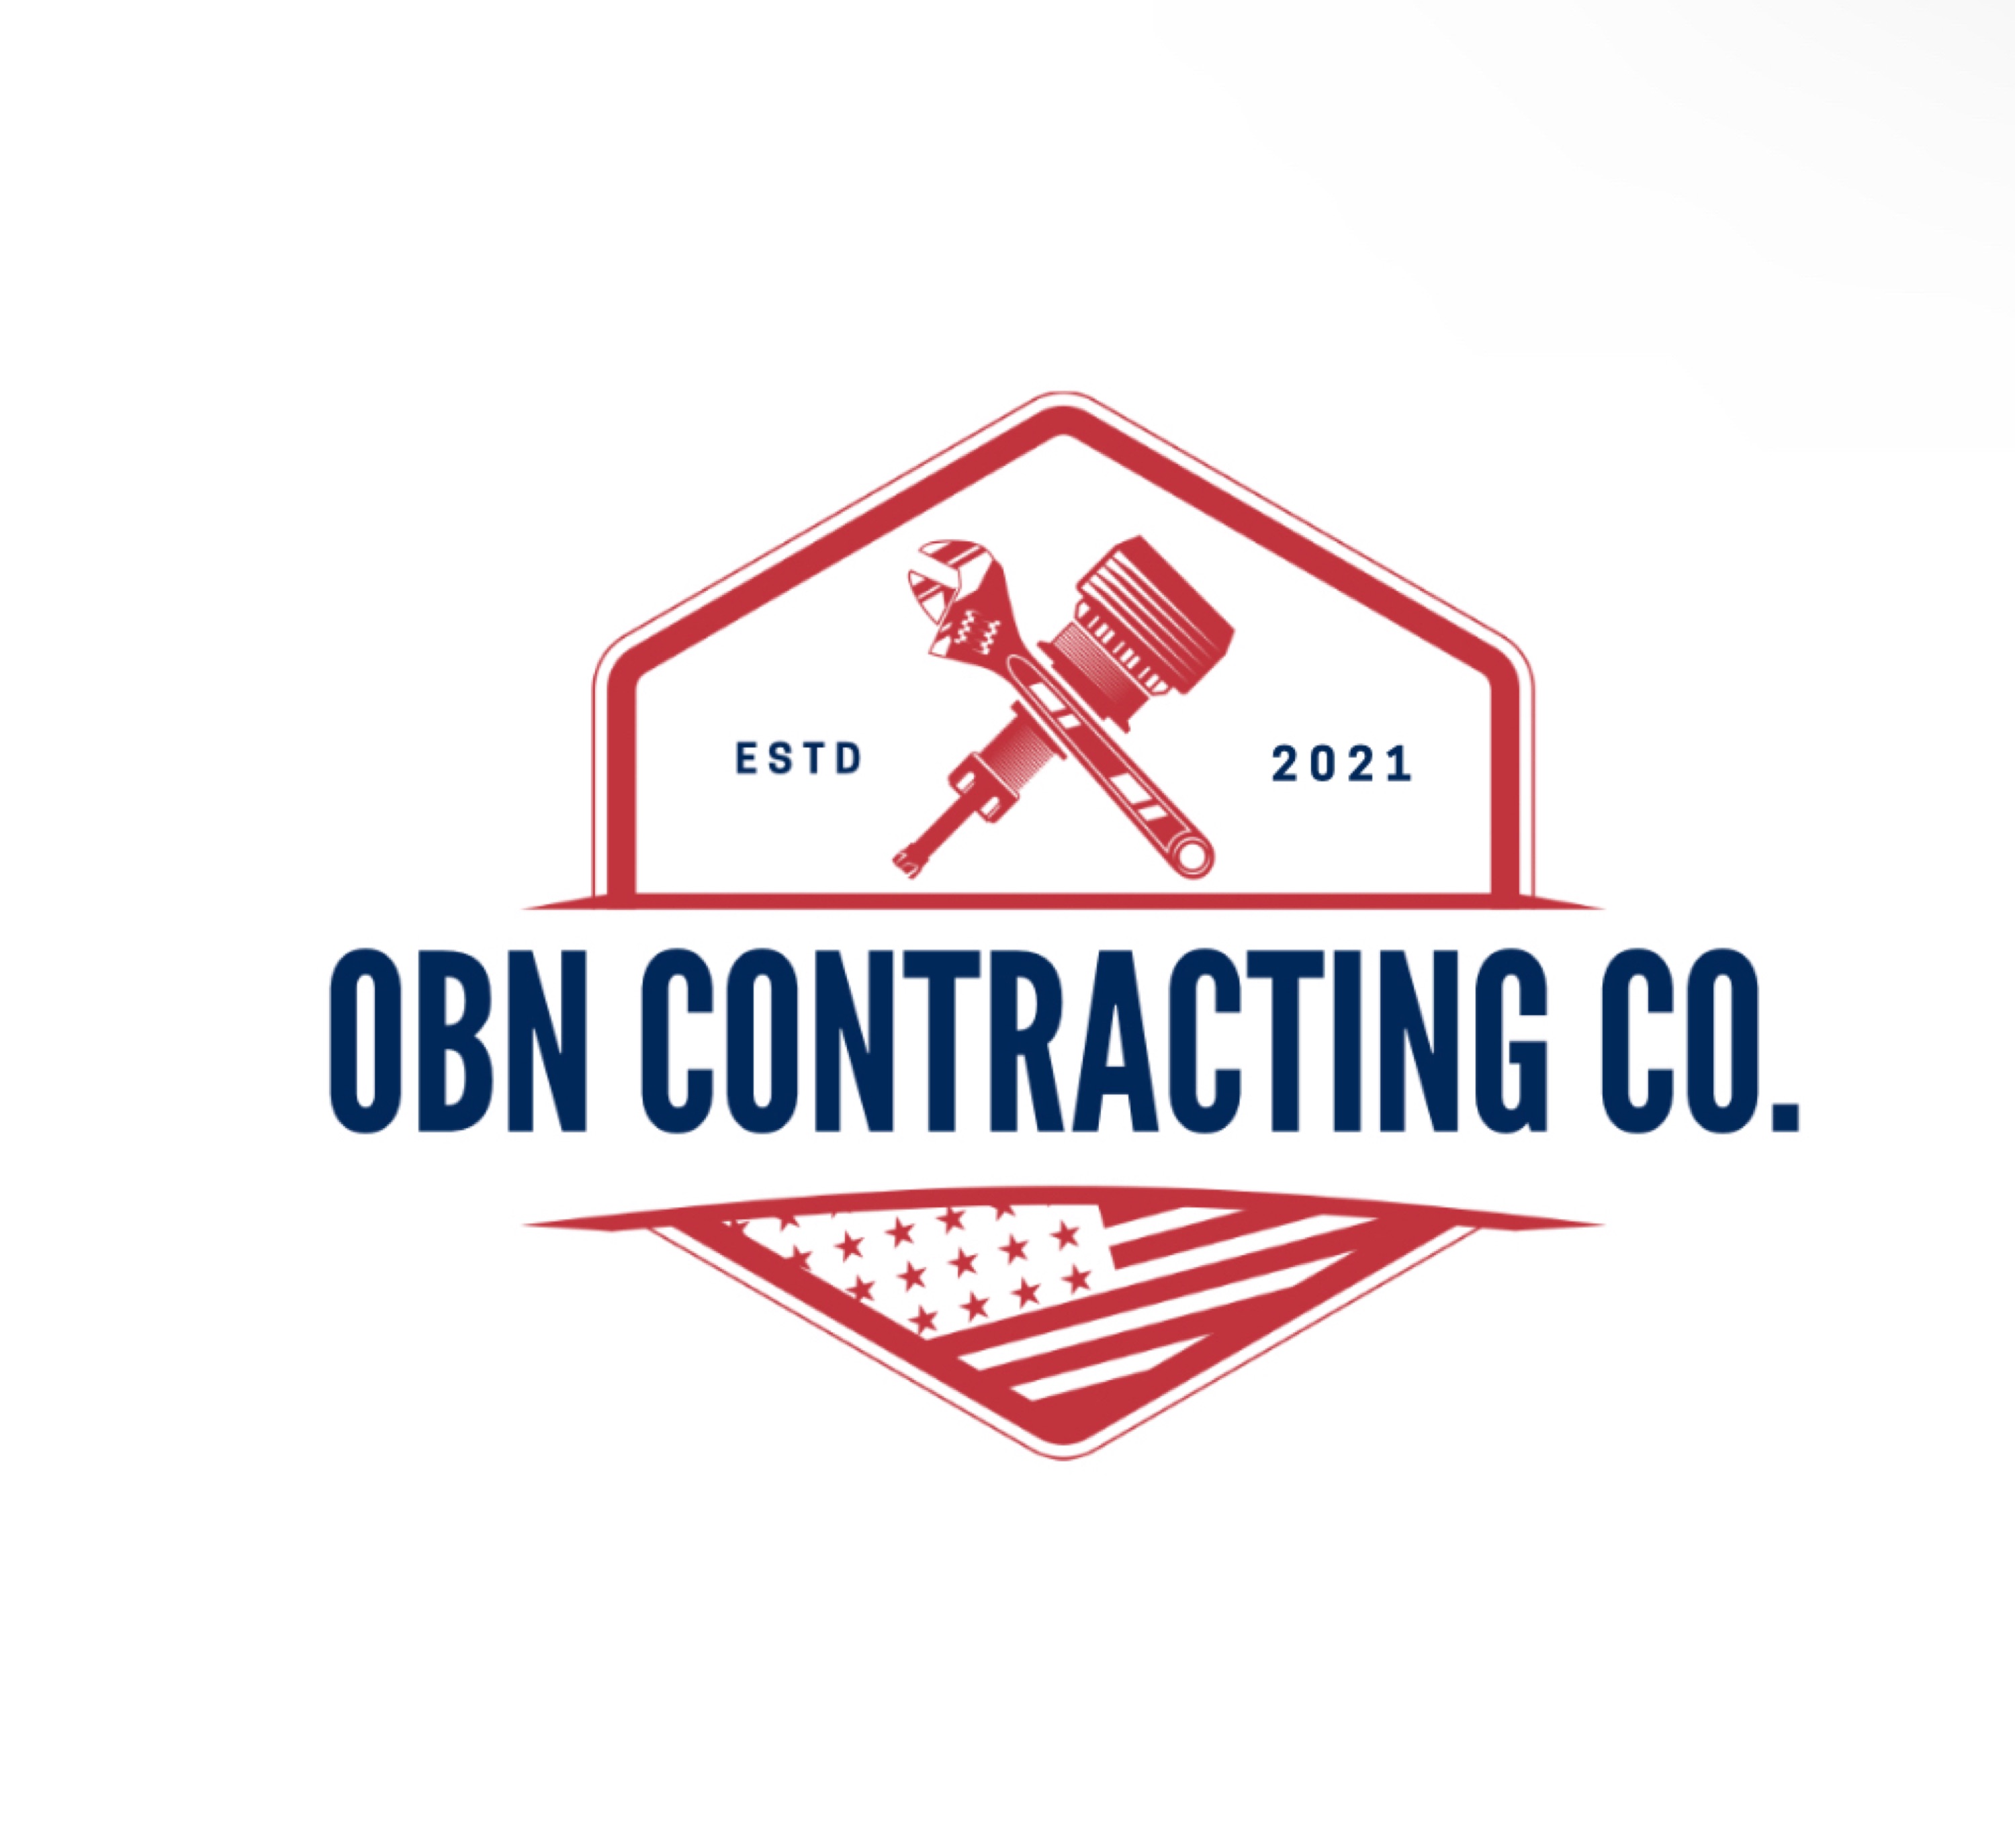 OBN Contracting Co. Logo